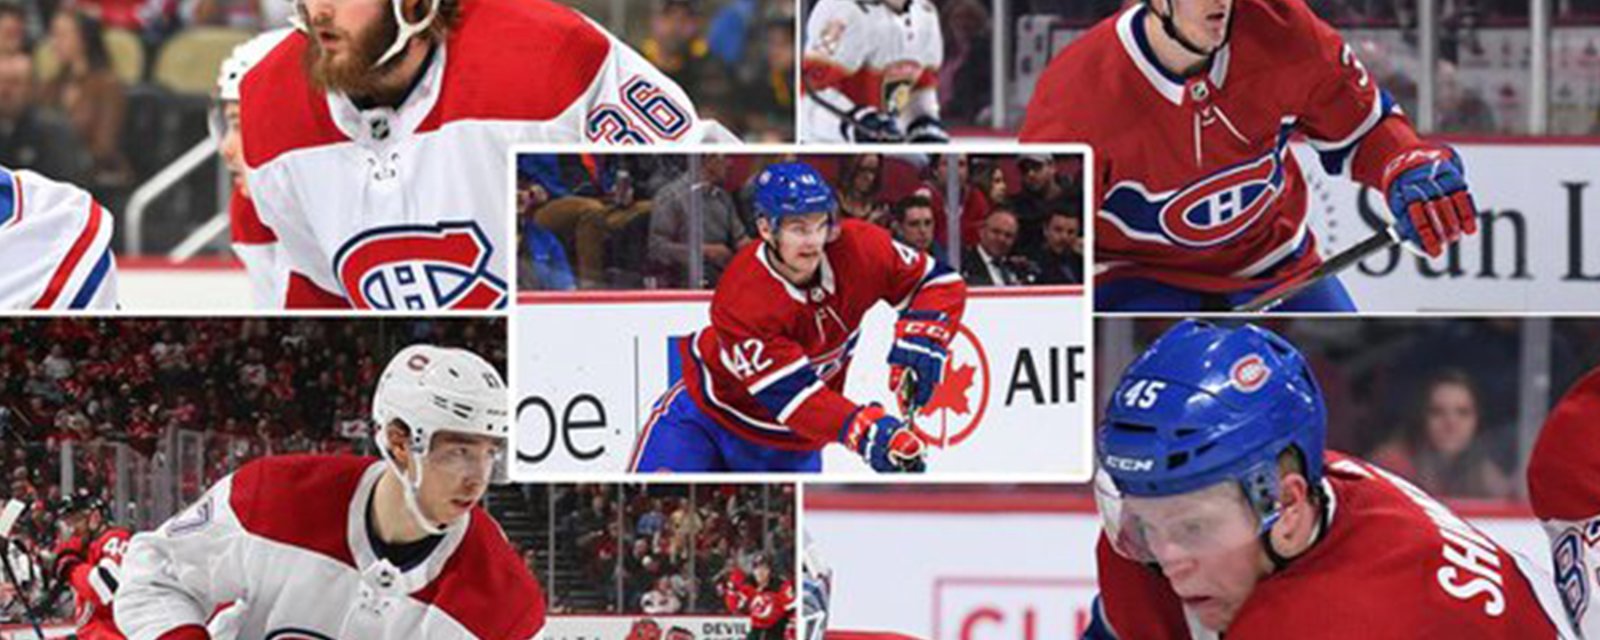 Breaking: Canadiens place five players on waivers, including two former 1st rounders